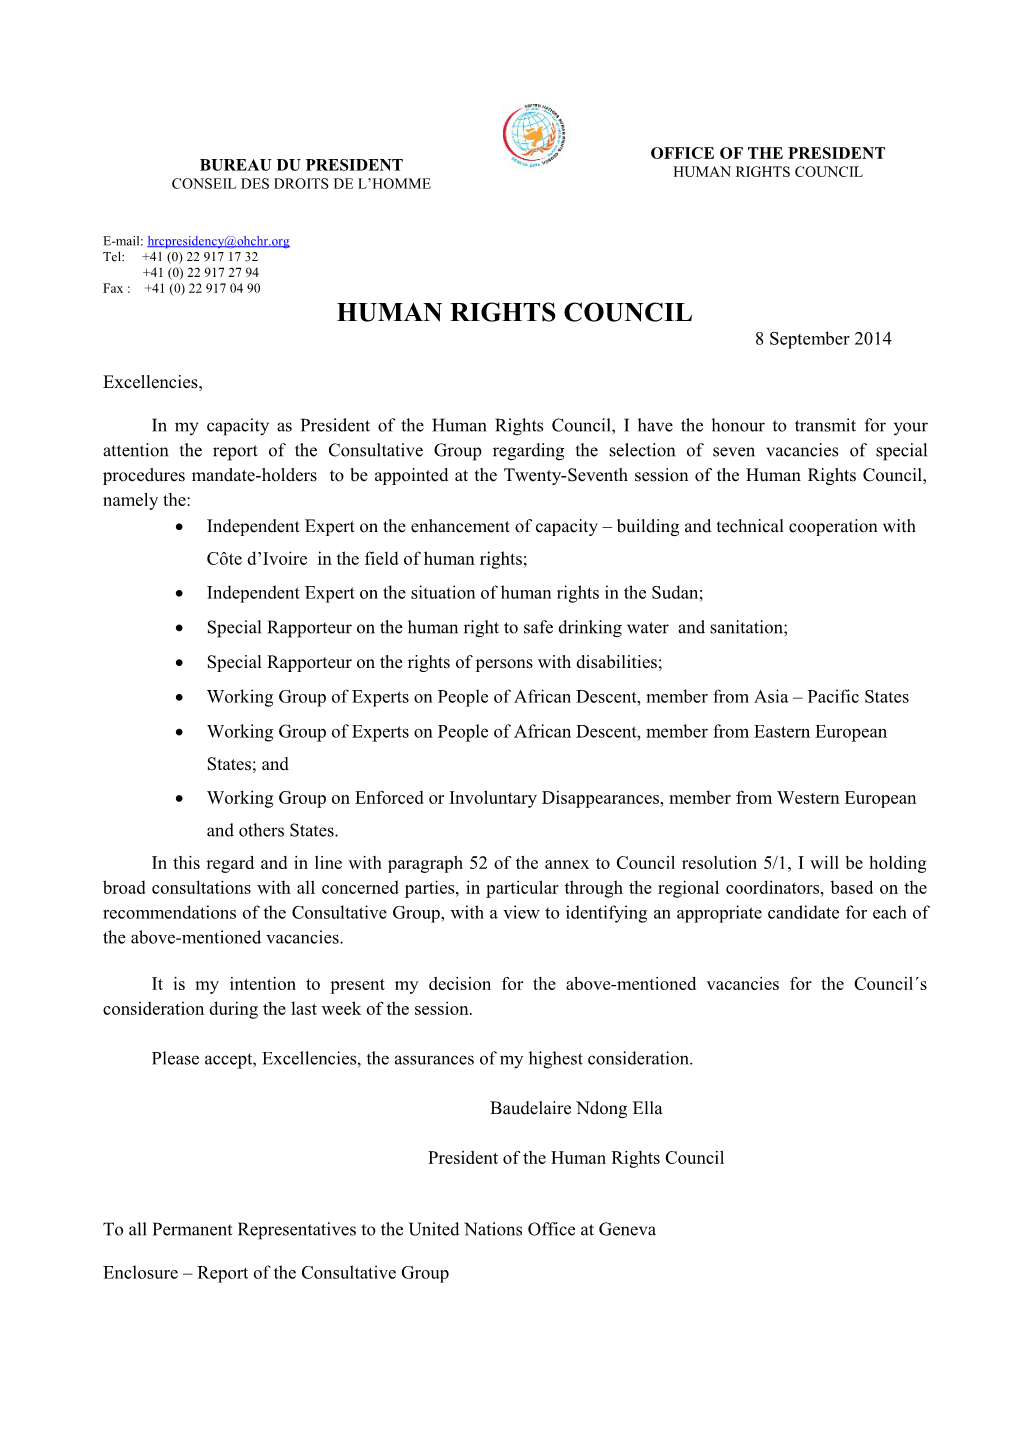 Letter of HRC President Transmitting CG Report on Selection and Appointment of 5 Mandate